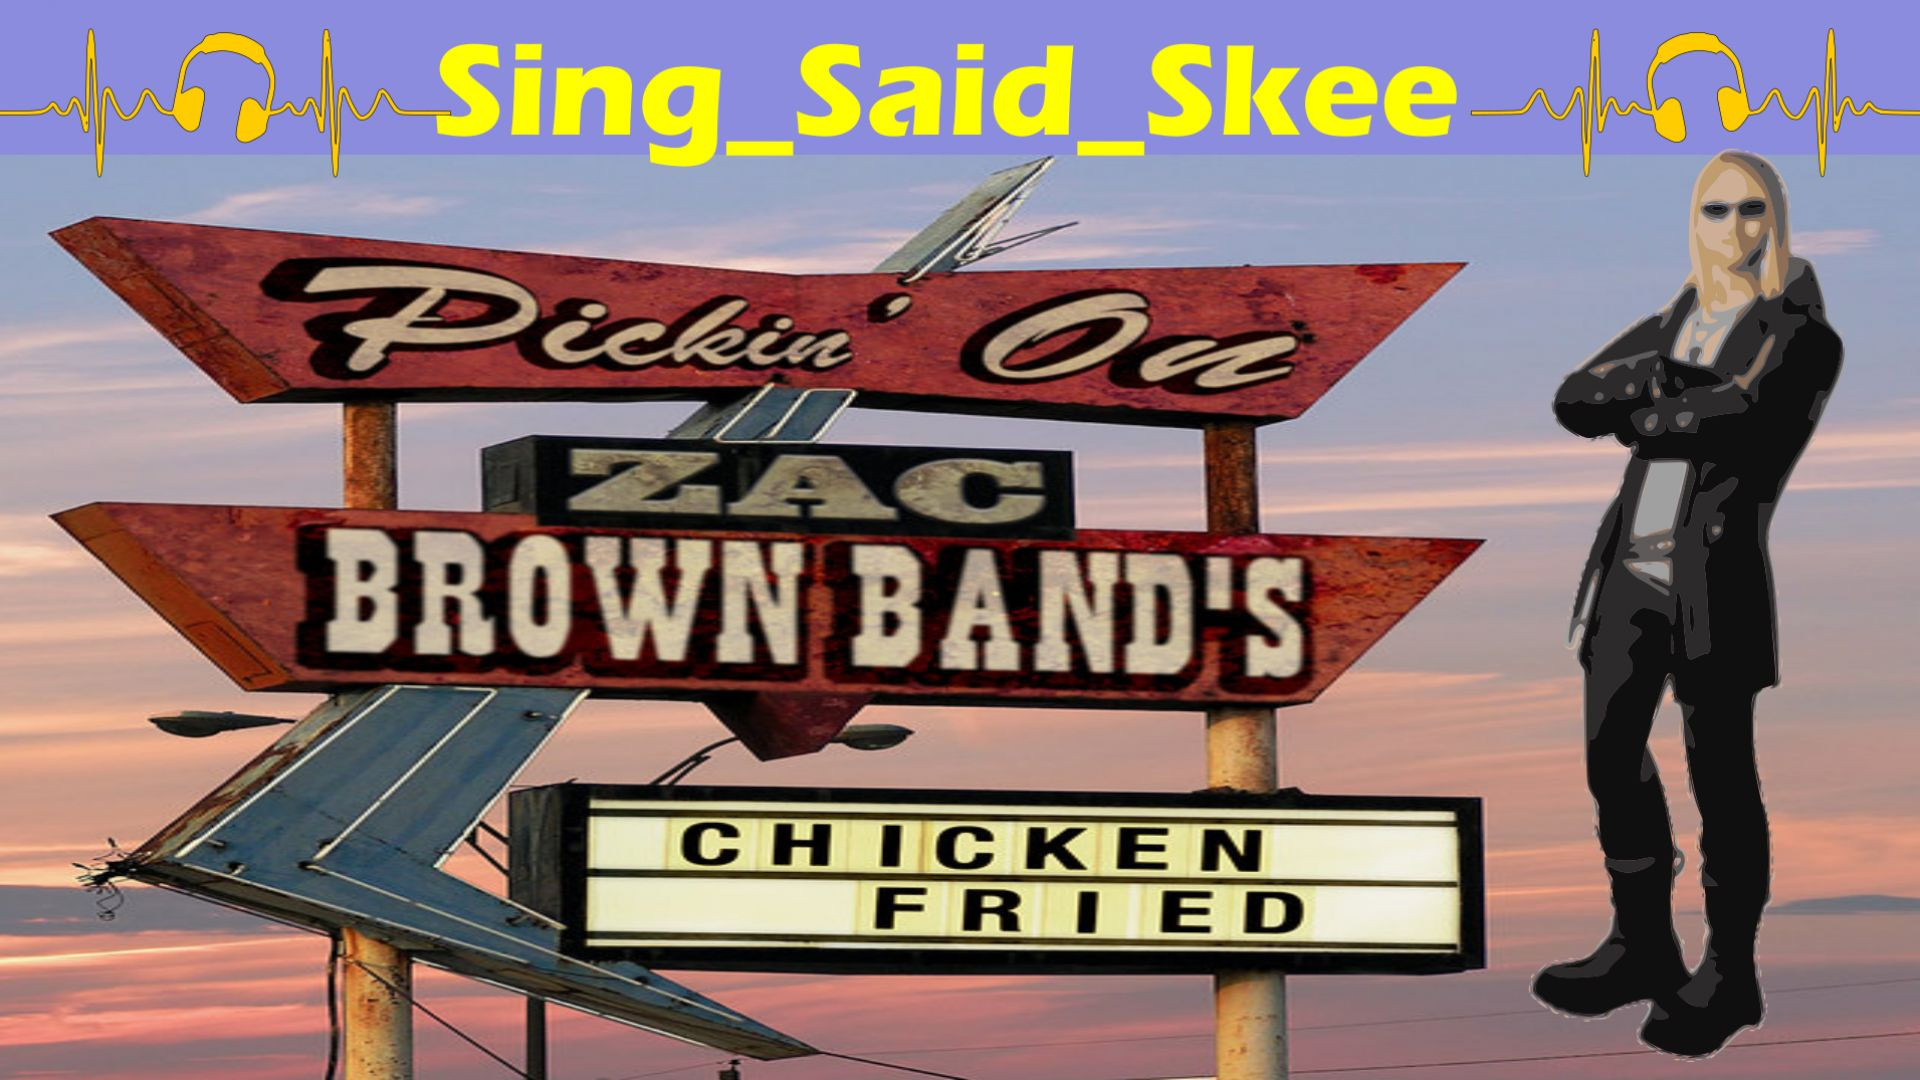 Chicken Fried - Zac Brown Band - Sing_Said_Skee